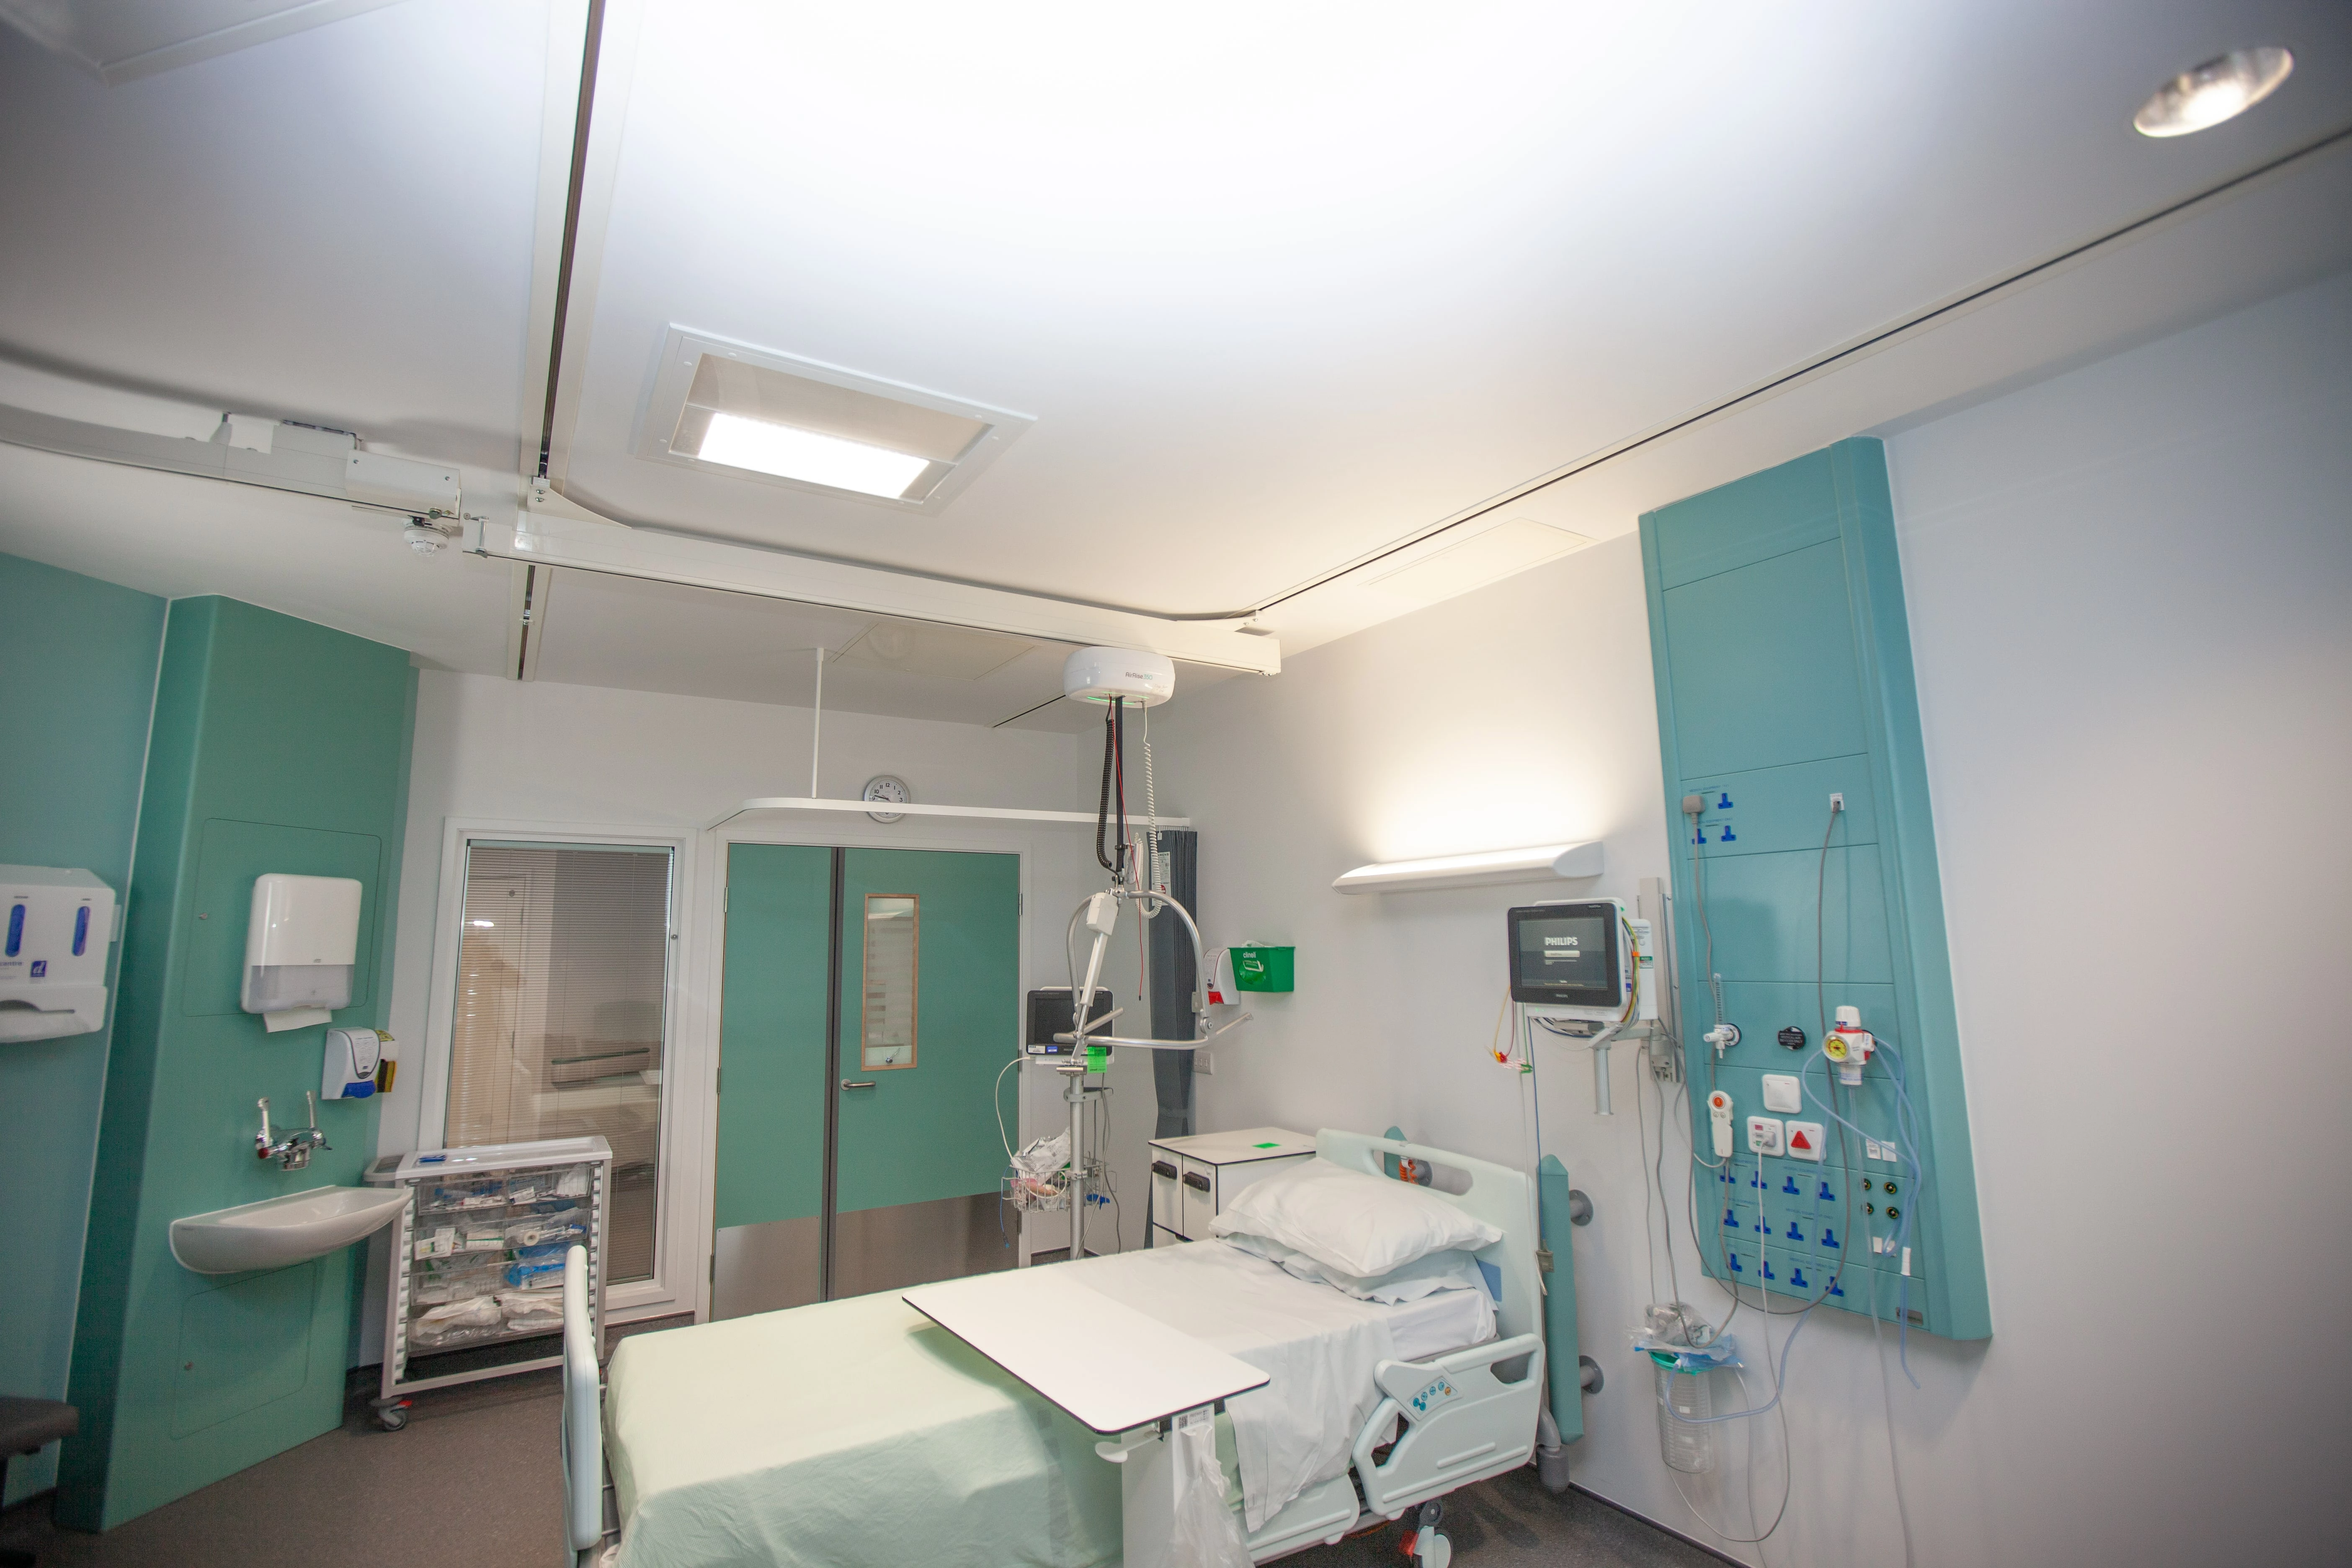 One of the bariatric bedrooms at the new Chase Farm Hospital.